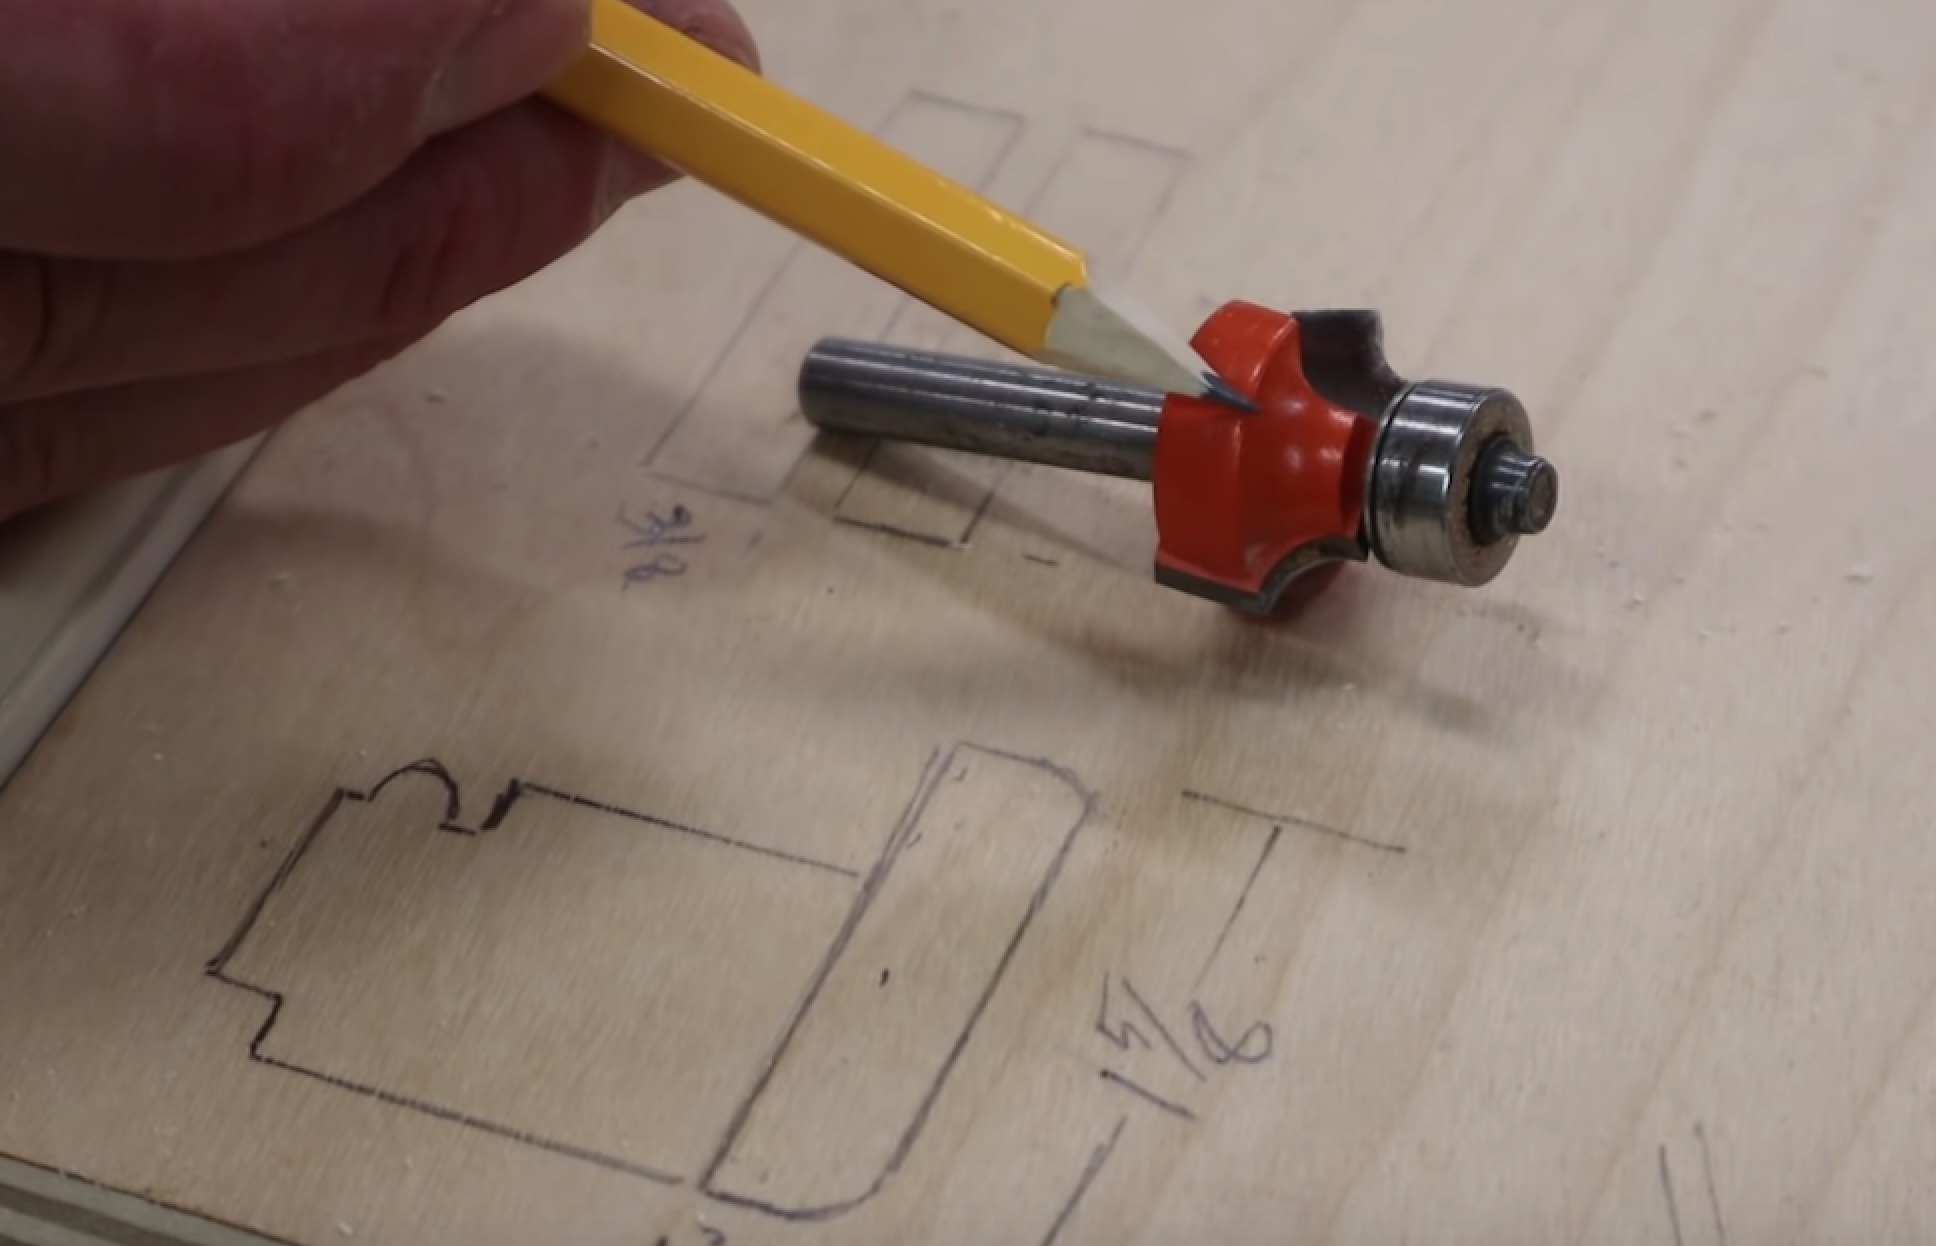 How to Make Molding with a Router & Build a Picture Frame - Free Design Plans - Jon ...